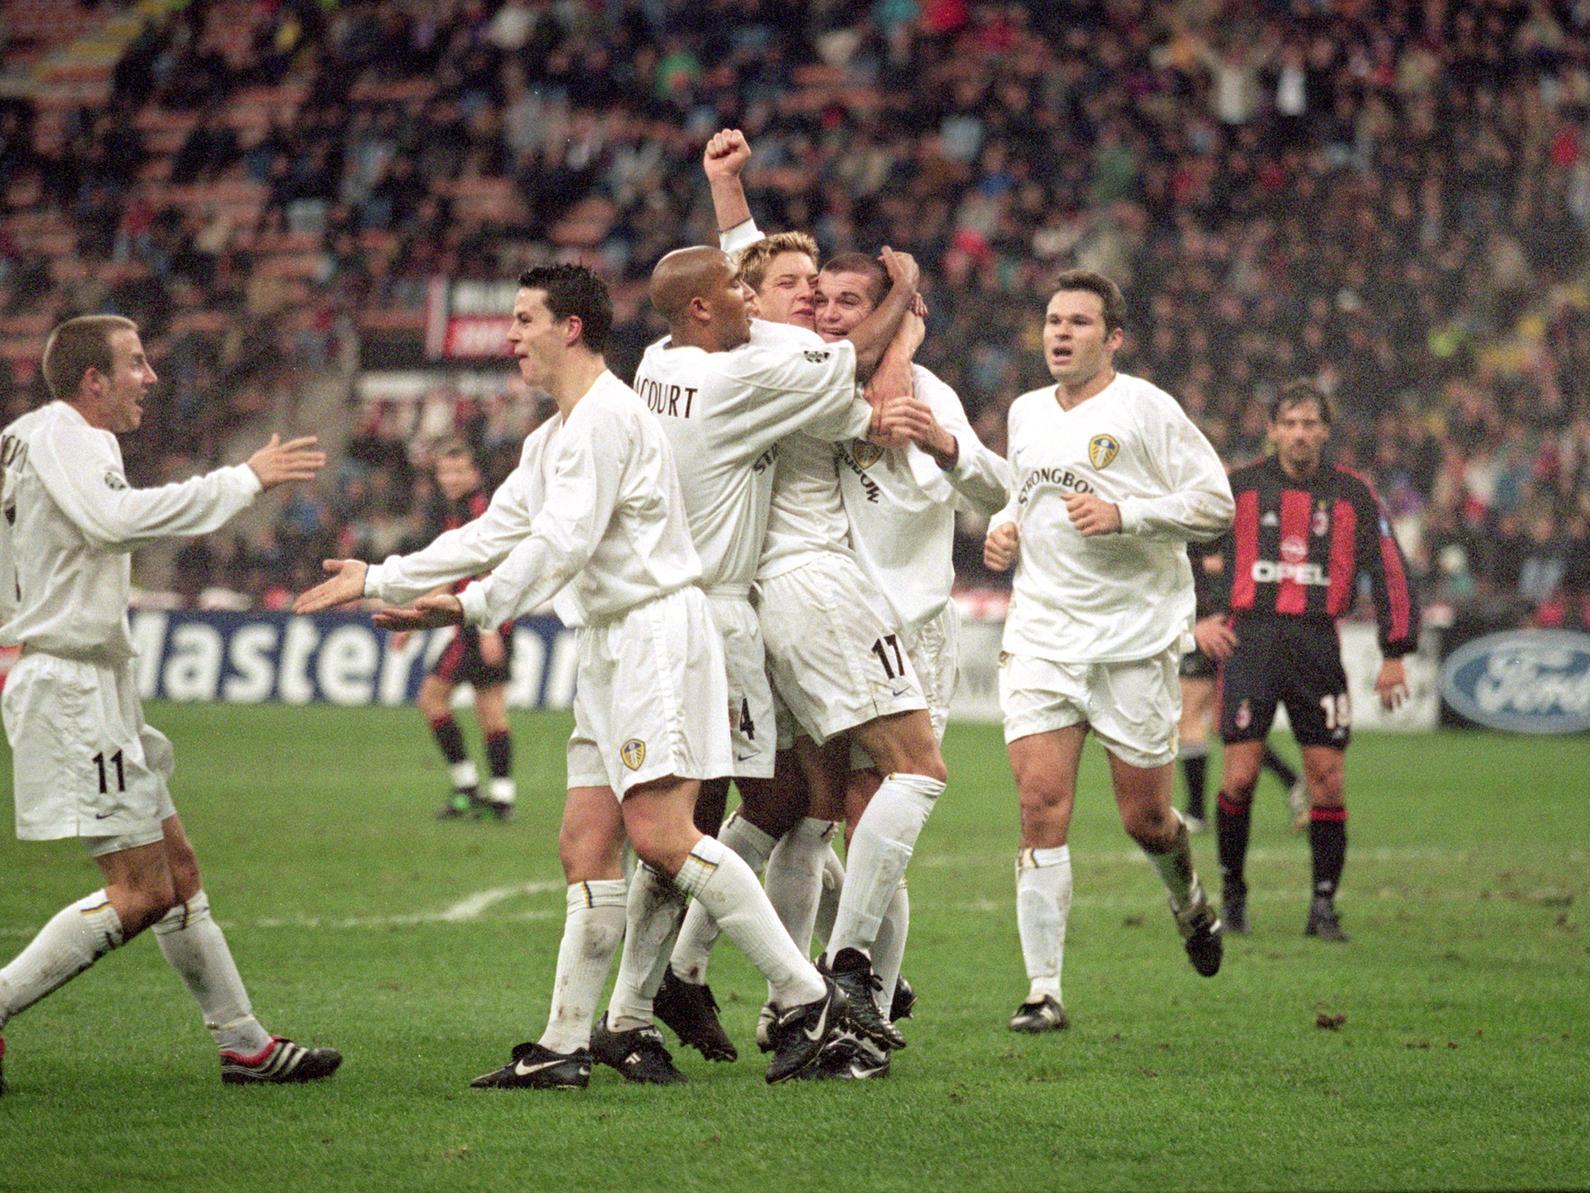 That headed goal on the stroke of half time from Dom Matteo proved sufficient for Leeds to get the draw needed to secure their qualification into the Champions League second phase. Remember who equalised for Milan that night?